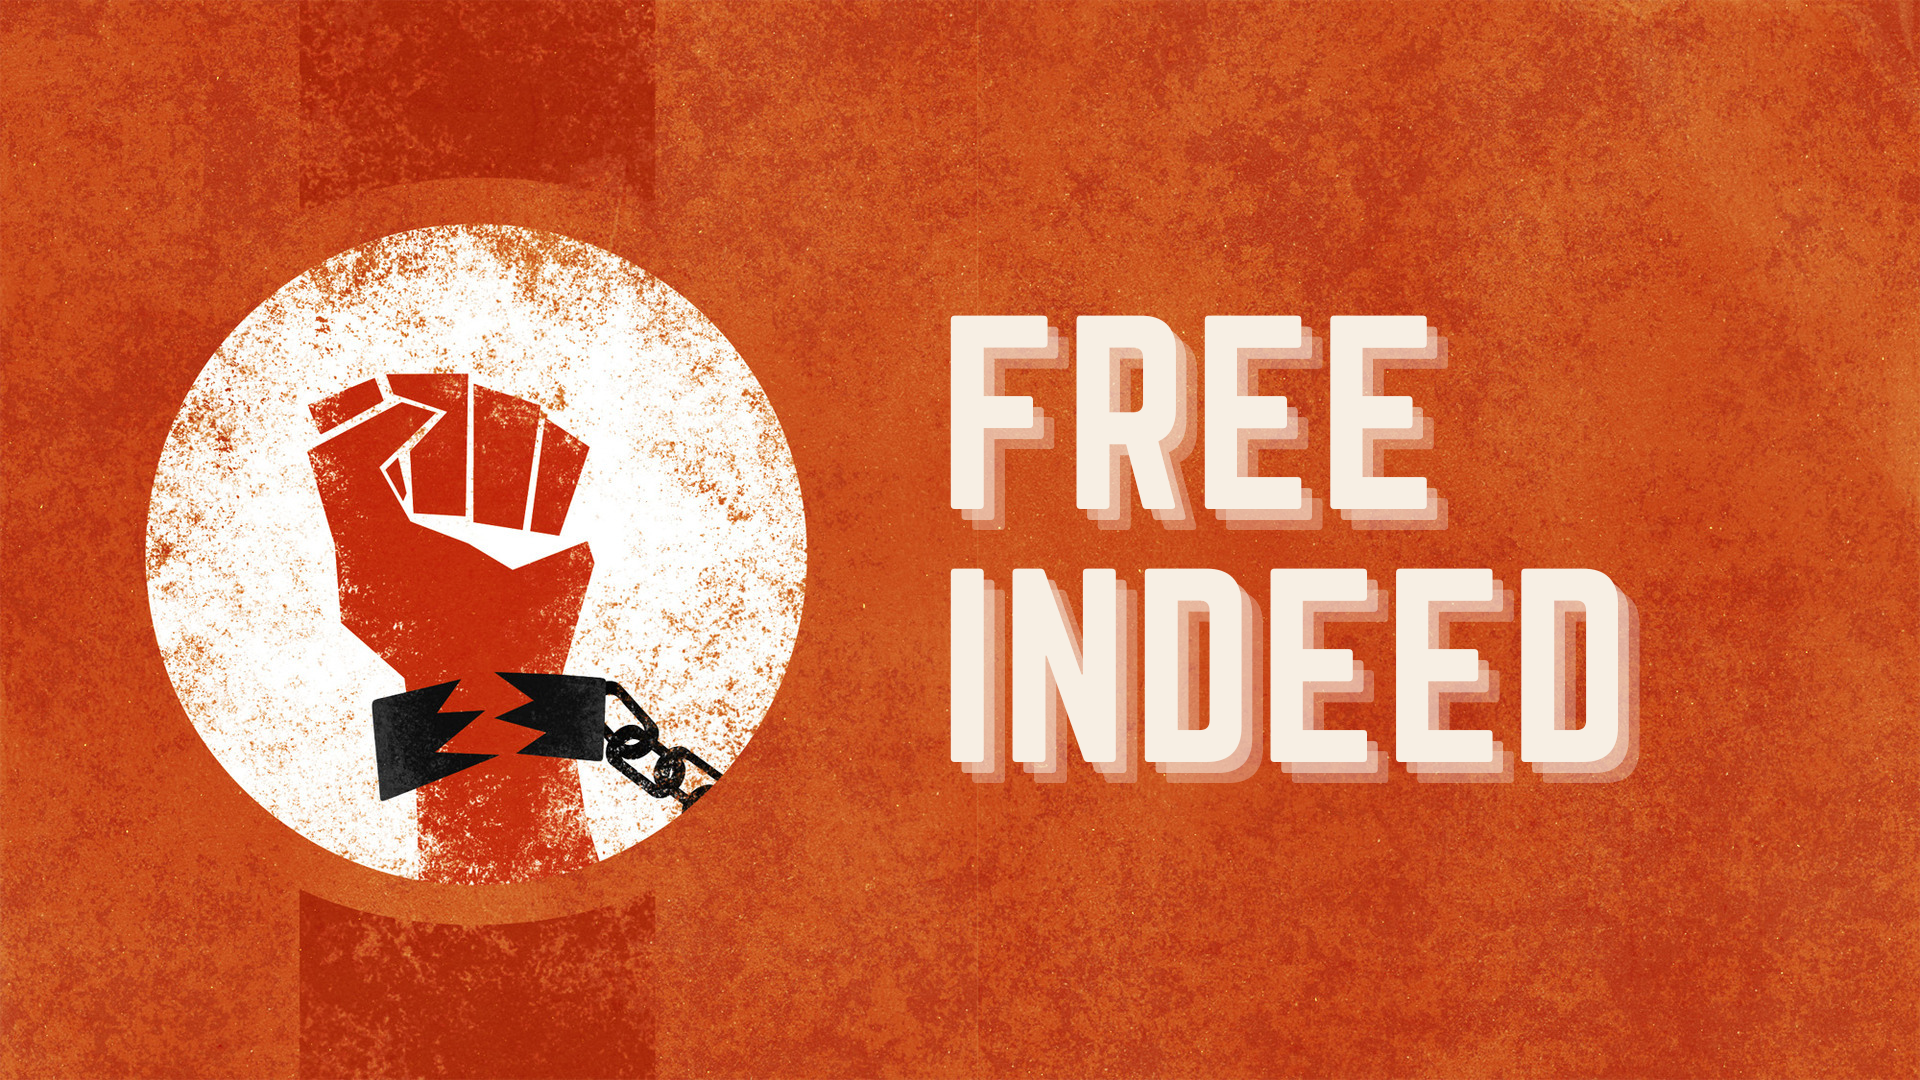 Free Indeed banner